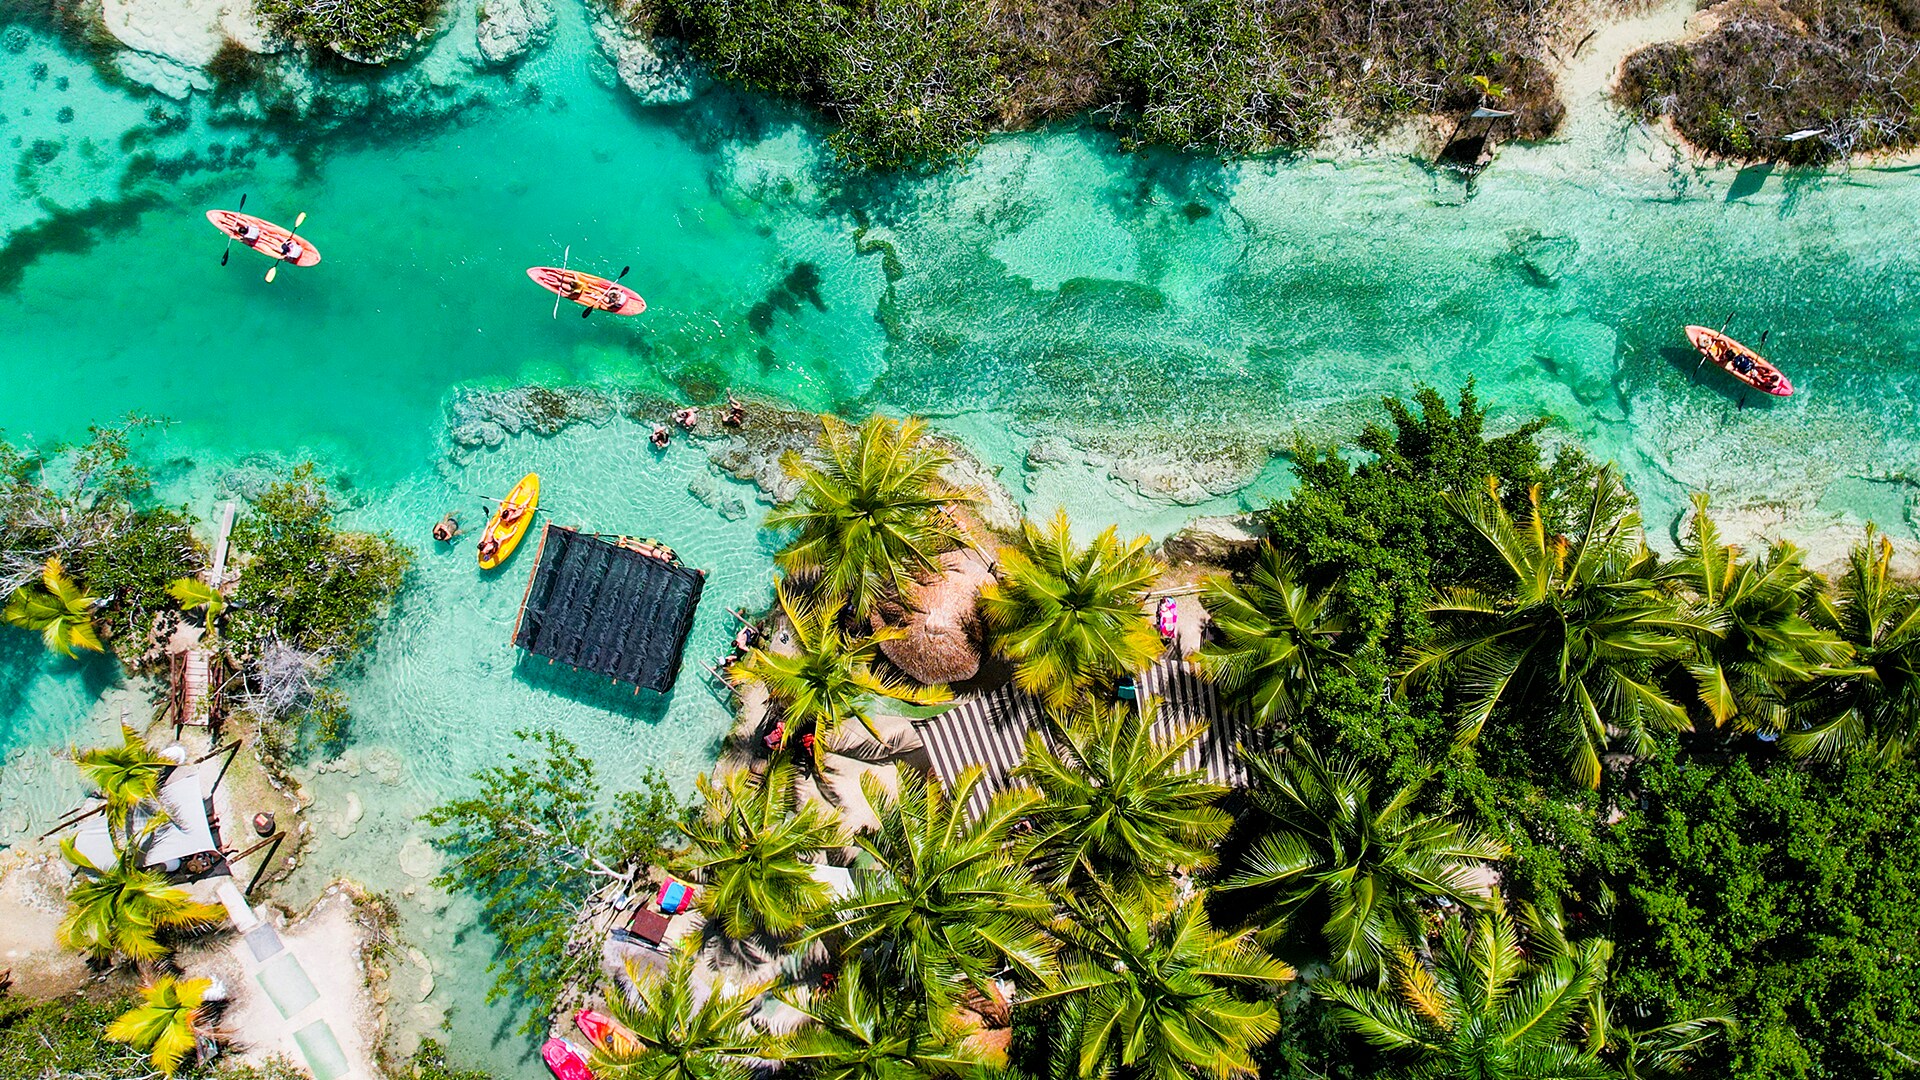 Kayakers paddle at Los Rapidos, a narrow strip of water that connects two large sections of Bacalar Lagoon.